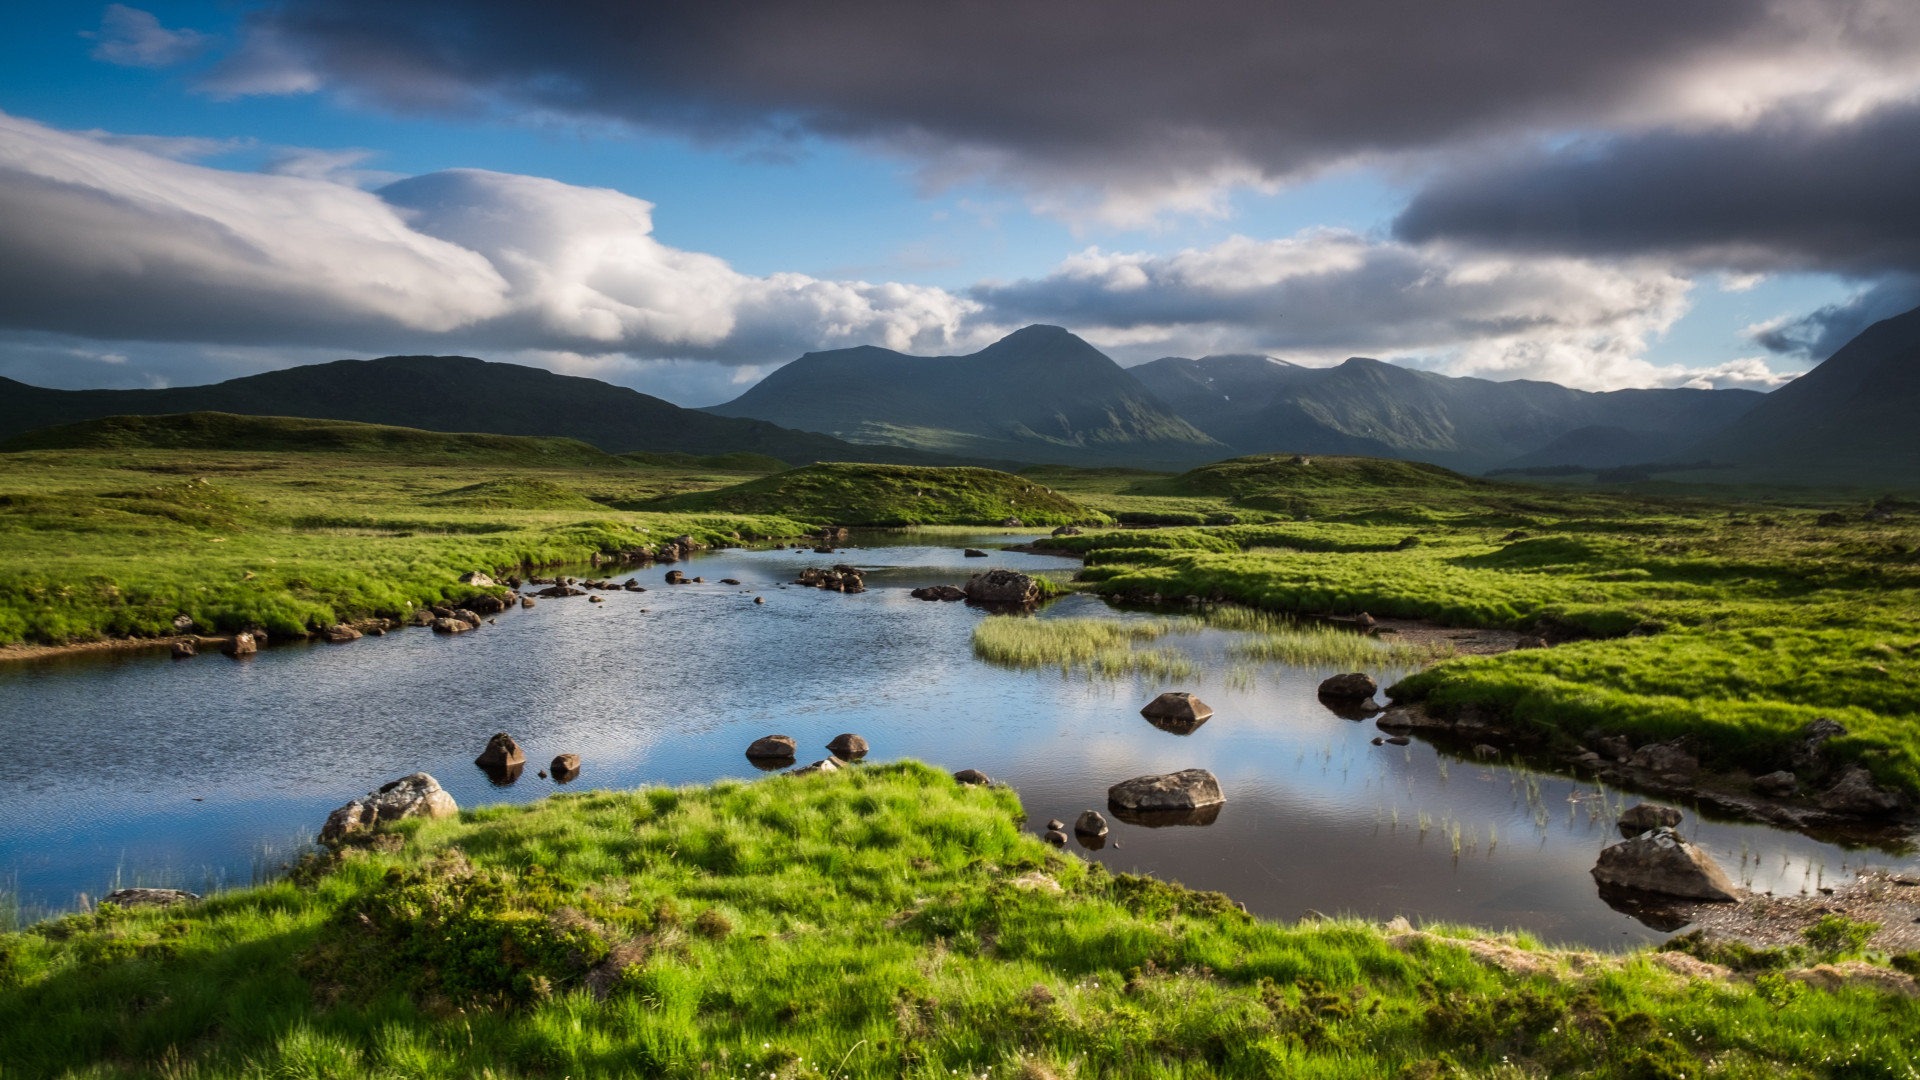 From there, marvel at the picturesque moorland wilderness of Rannoch Moor.<p>You may also like:<a href="https://www.starsinsider.com/n/465055?utm_source=msn.com&utm_medium=display&utm_campaign=referral_description&utm_content=162752v2en-en"> Celebs who kept their serious illnesses a secret</a></p>